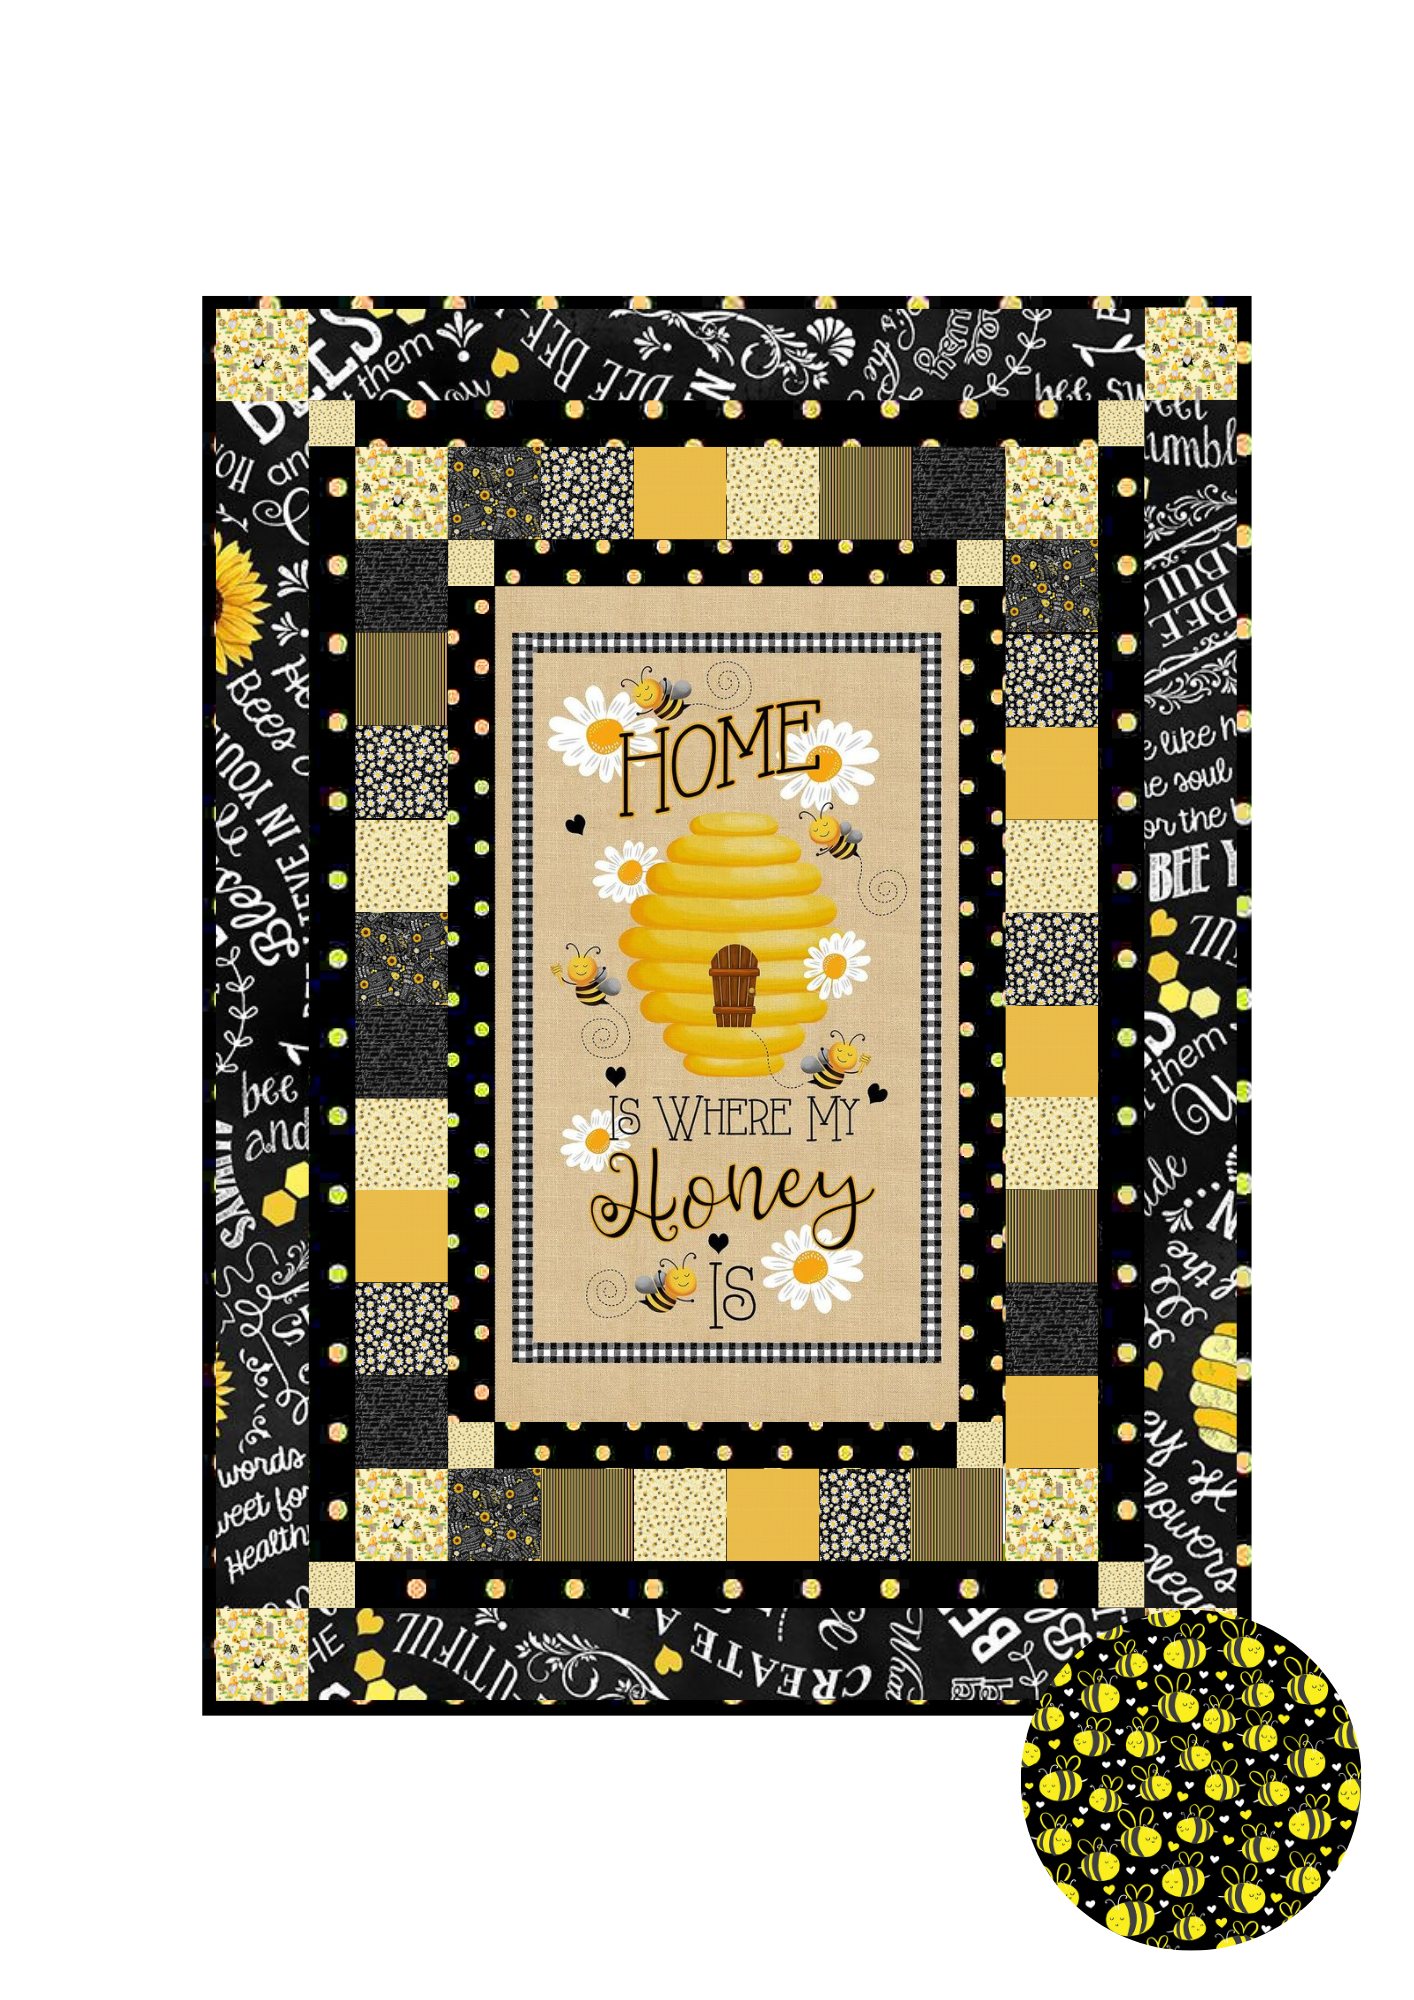 Timeless Treasures Quilt Kit Kit w/backing Plump Bees on Black Beginner Bee Hive Quilt Kit Timeless Treasures Home Is Where My Honey Is DIY Panel Quilt